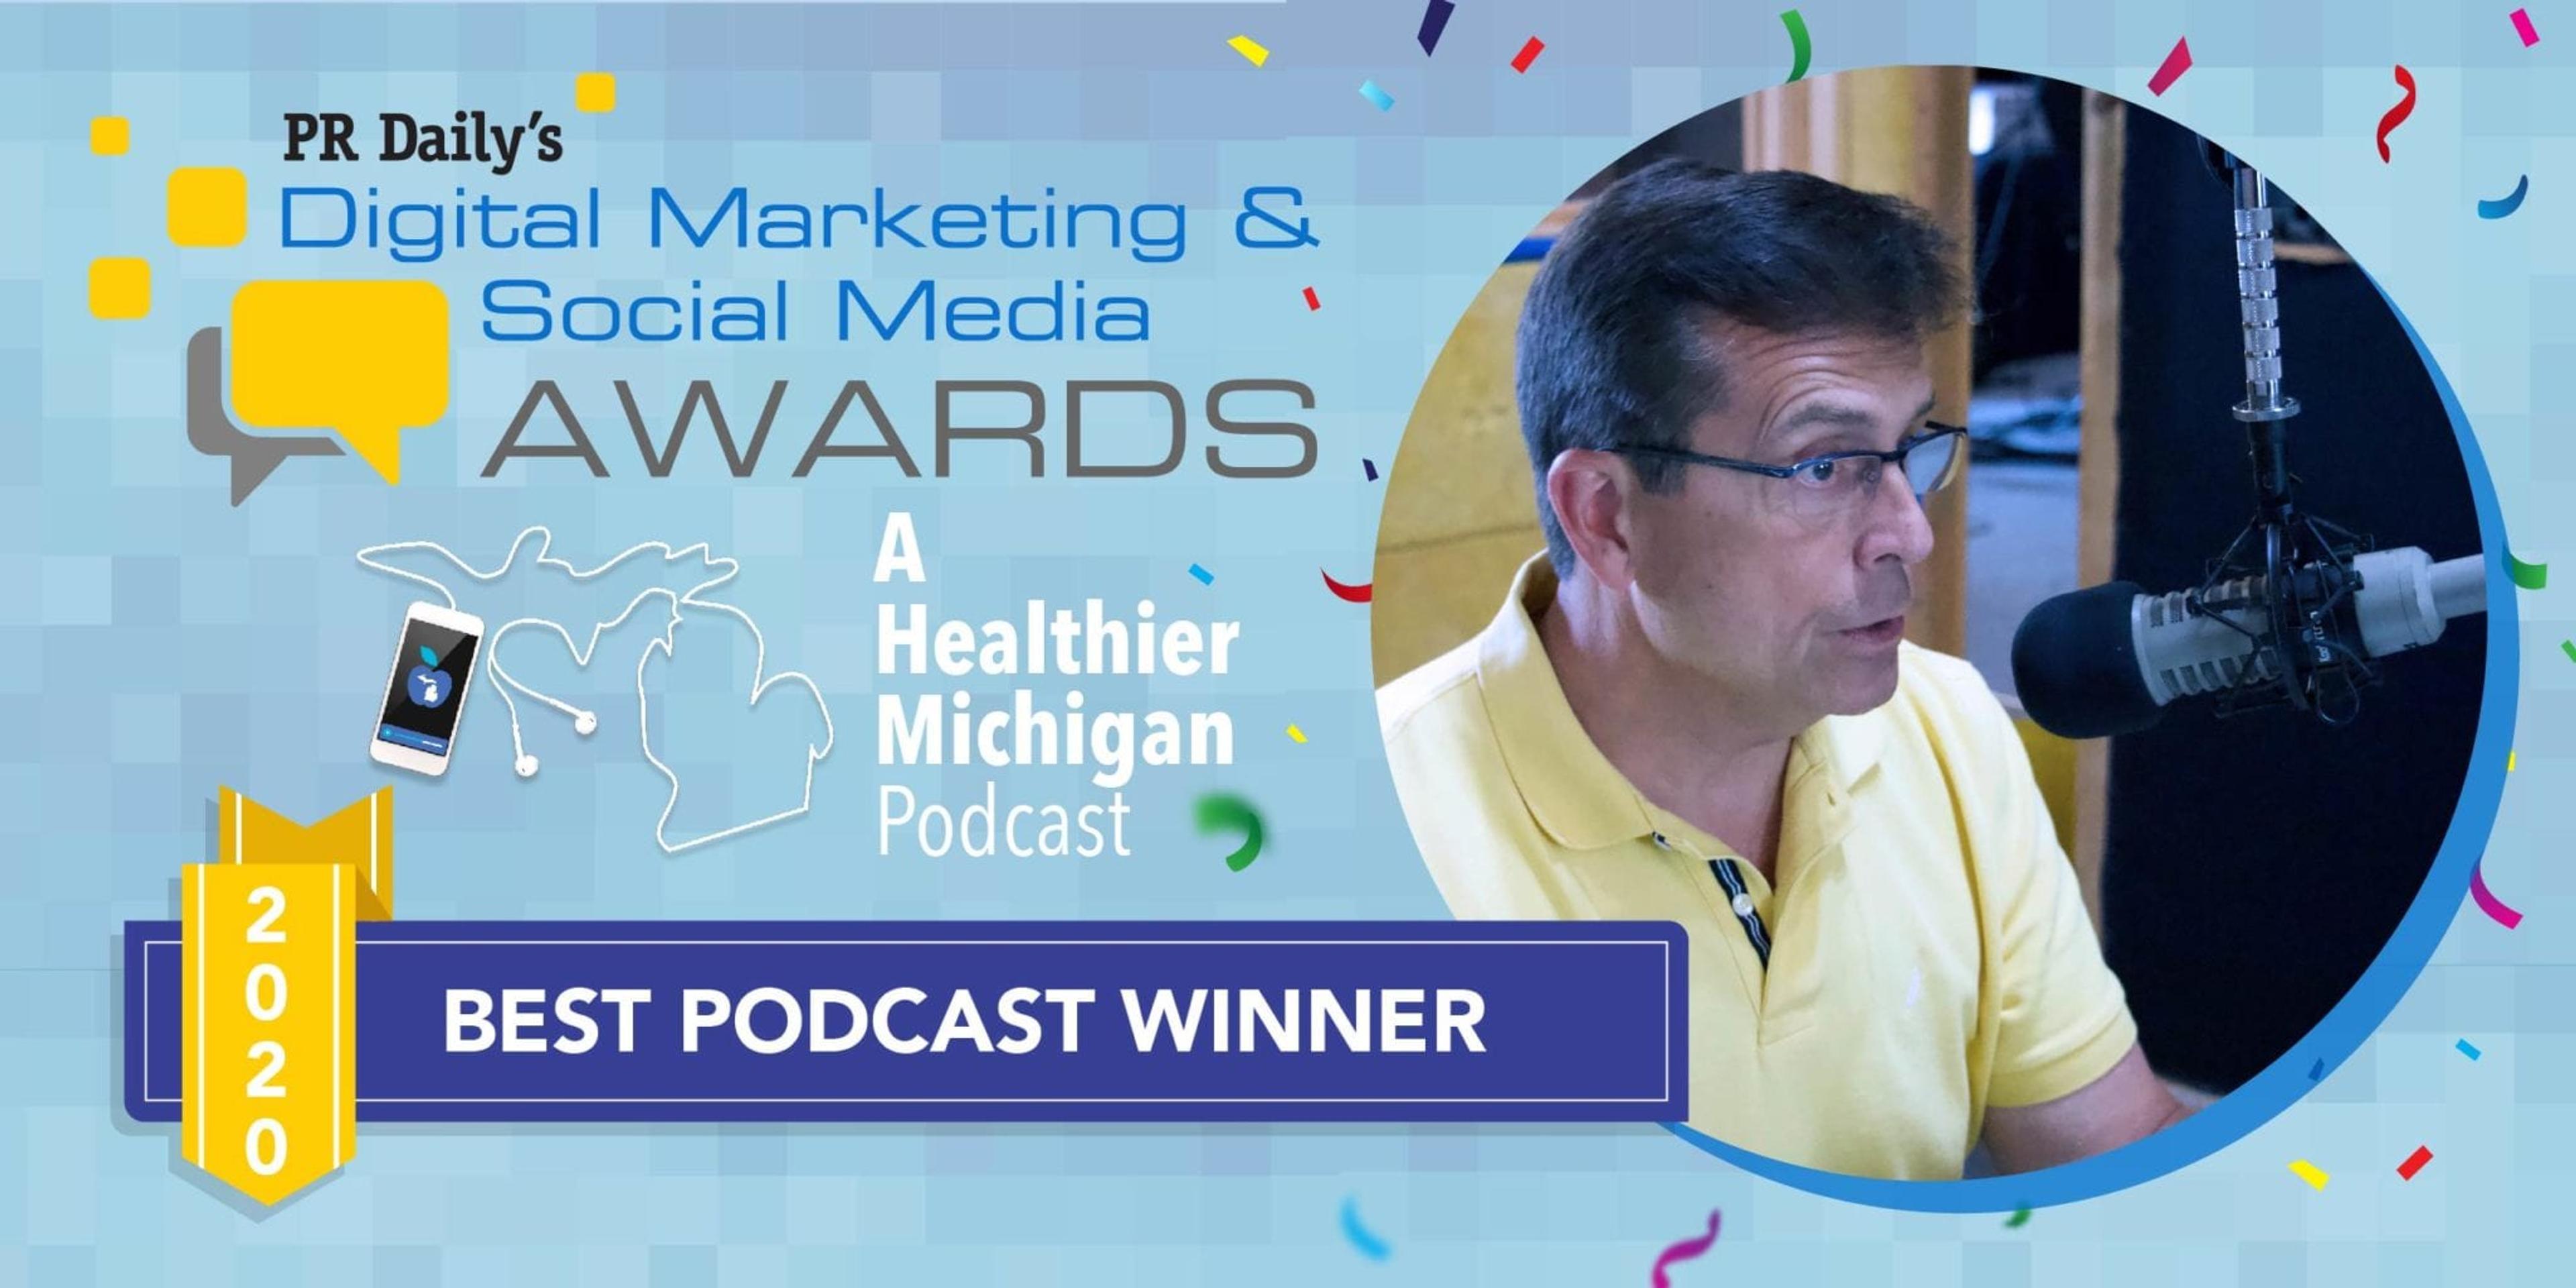 A Healthier Michigan Podcast with Chuck Gaidica wins Best Podcast